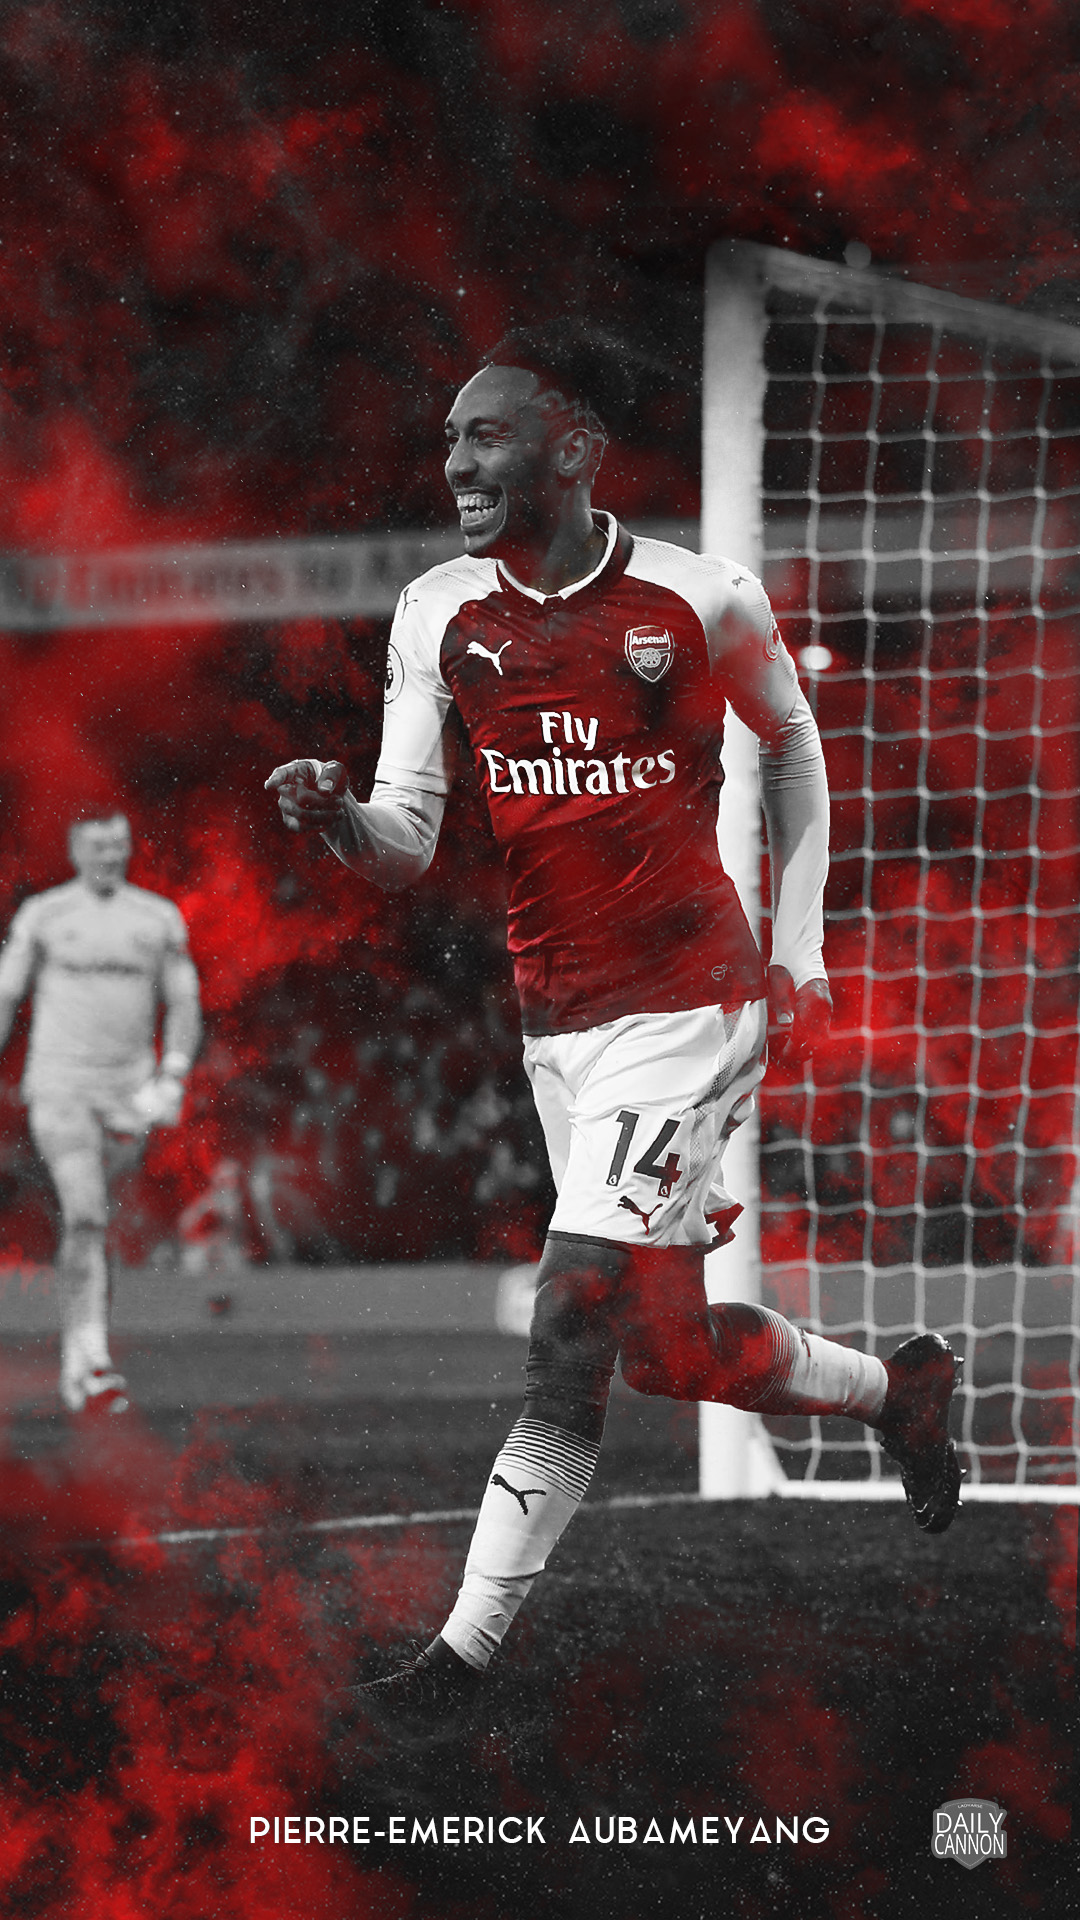 Amazing Arsenal phone wallpaper collaboration with Humans Of The Arsenal +  new signings bonus